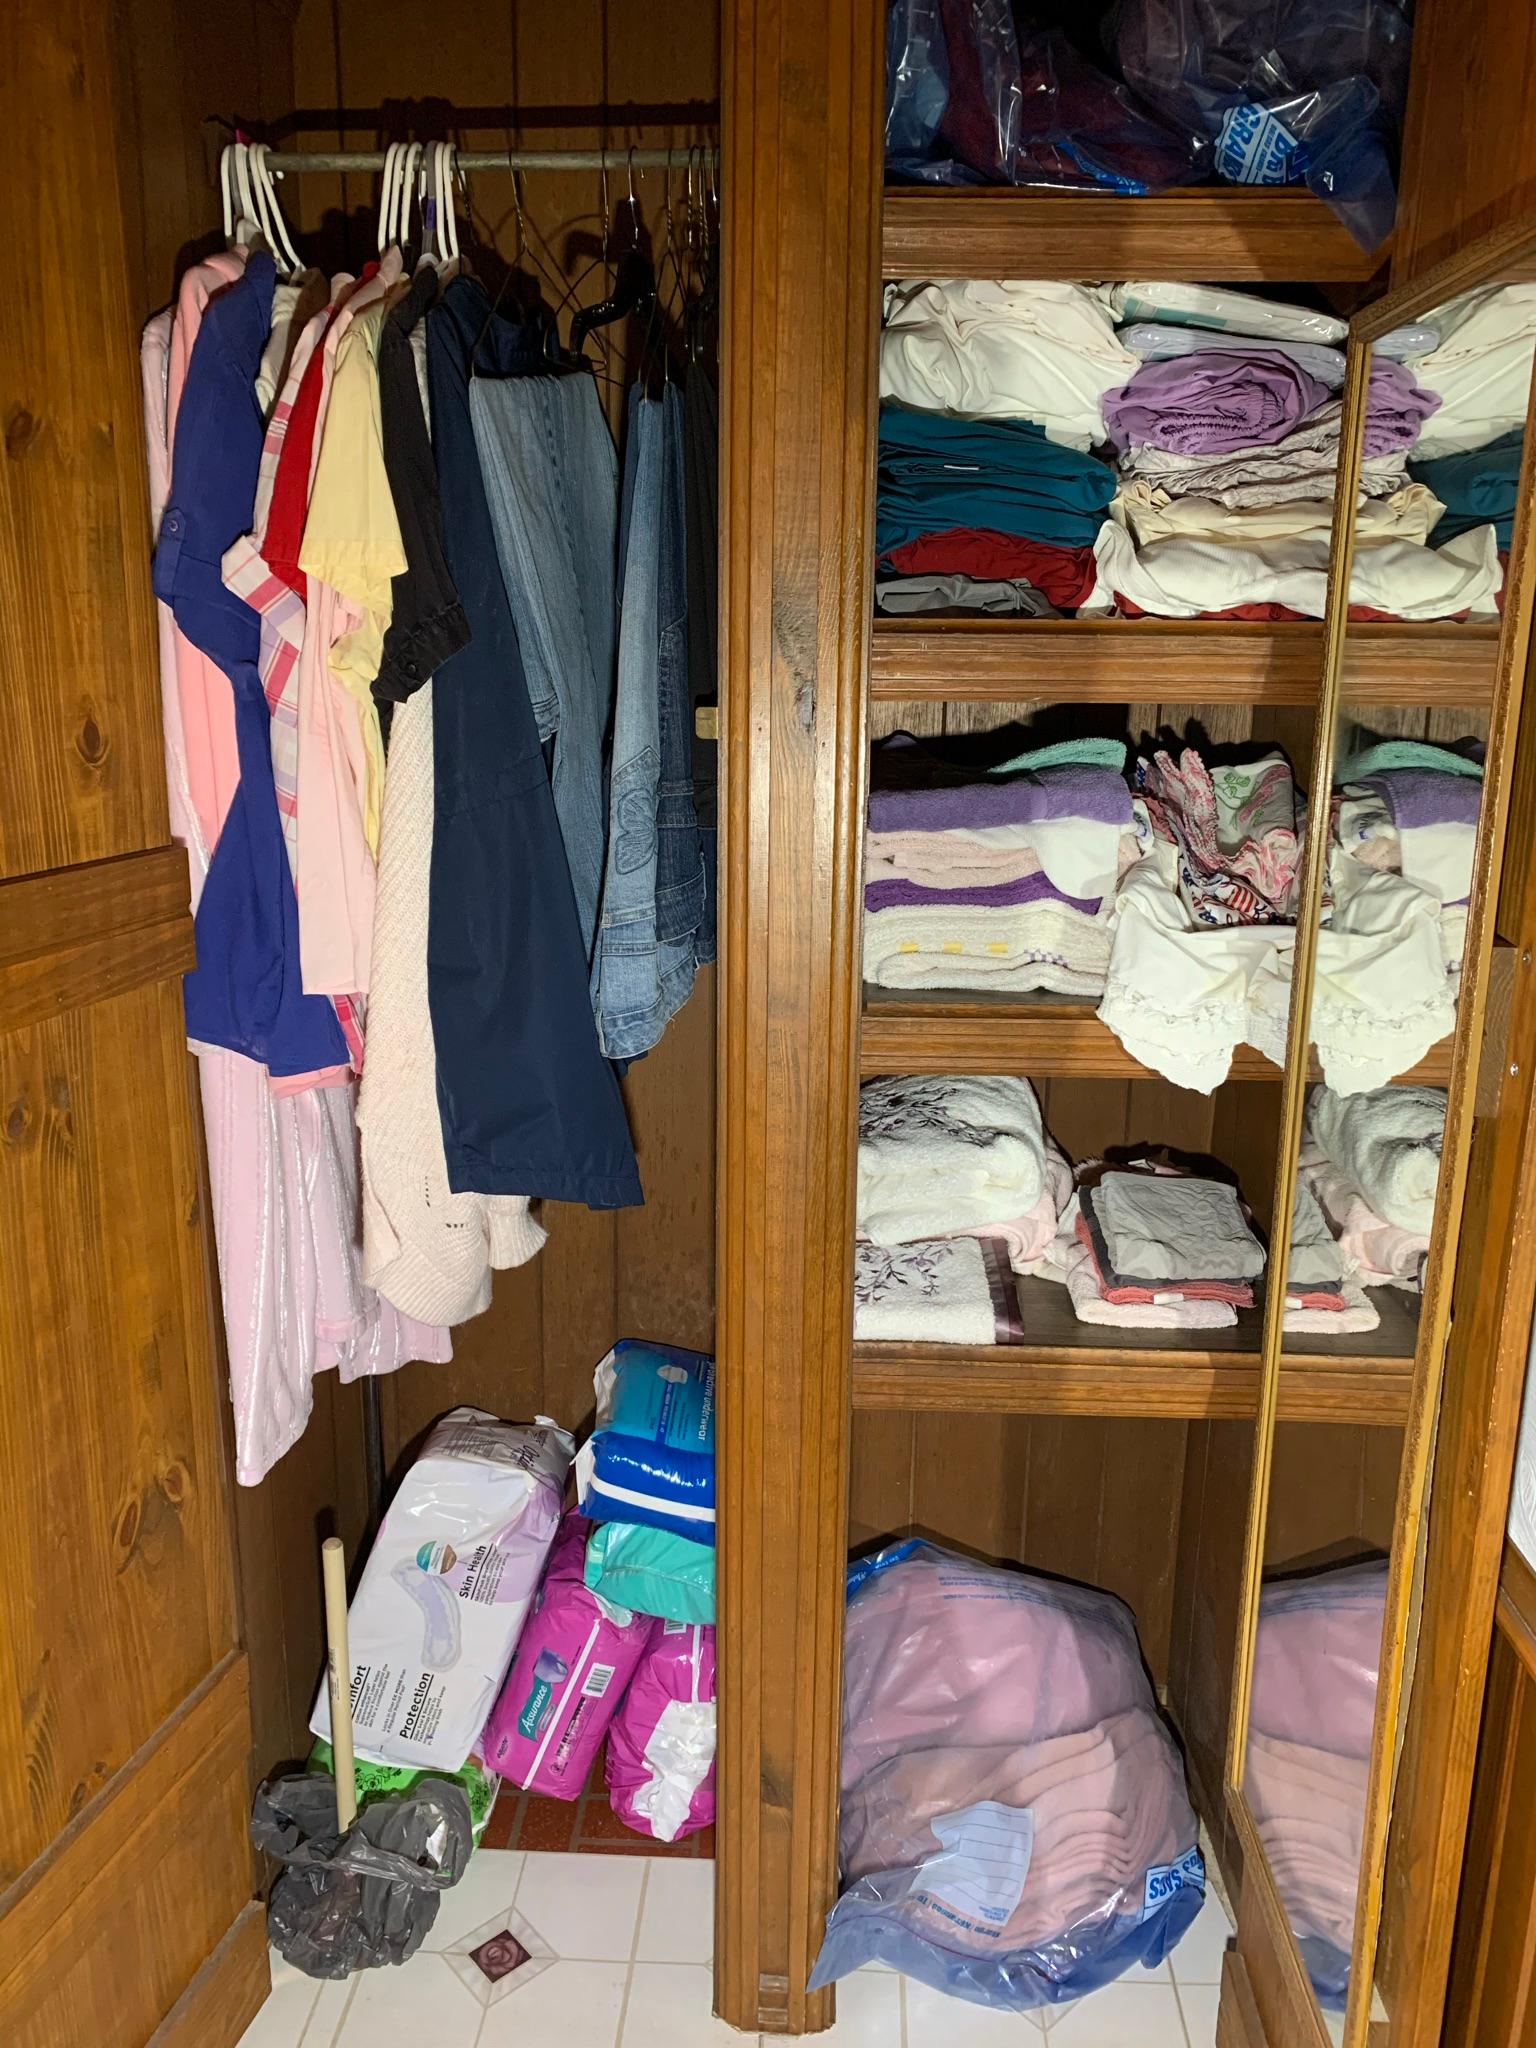 Cleanout of Bathroom - Towel, Sheets, Clothing Adult Care Products, & More